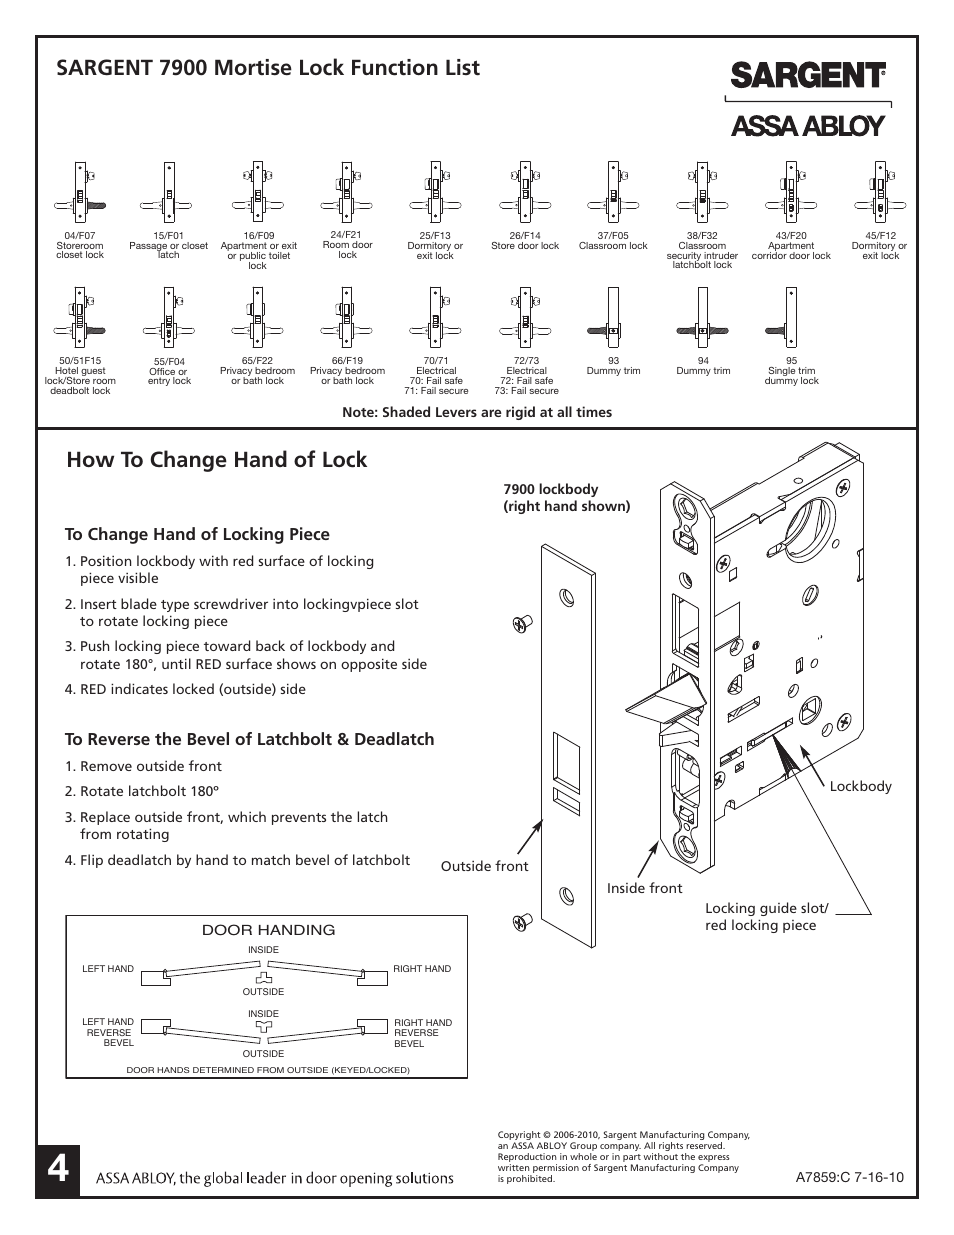 Sargent 7900 mortise lock function list, How to change hand of lock